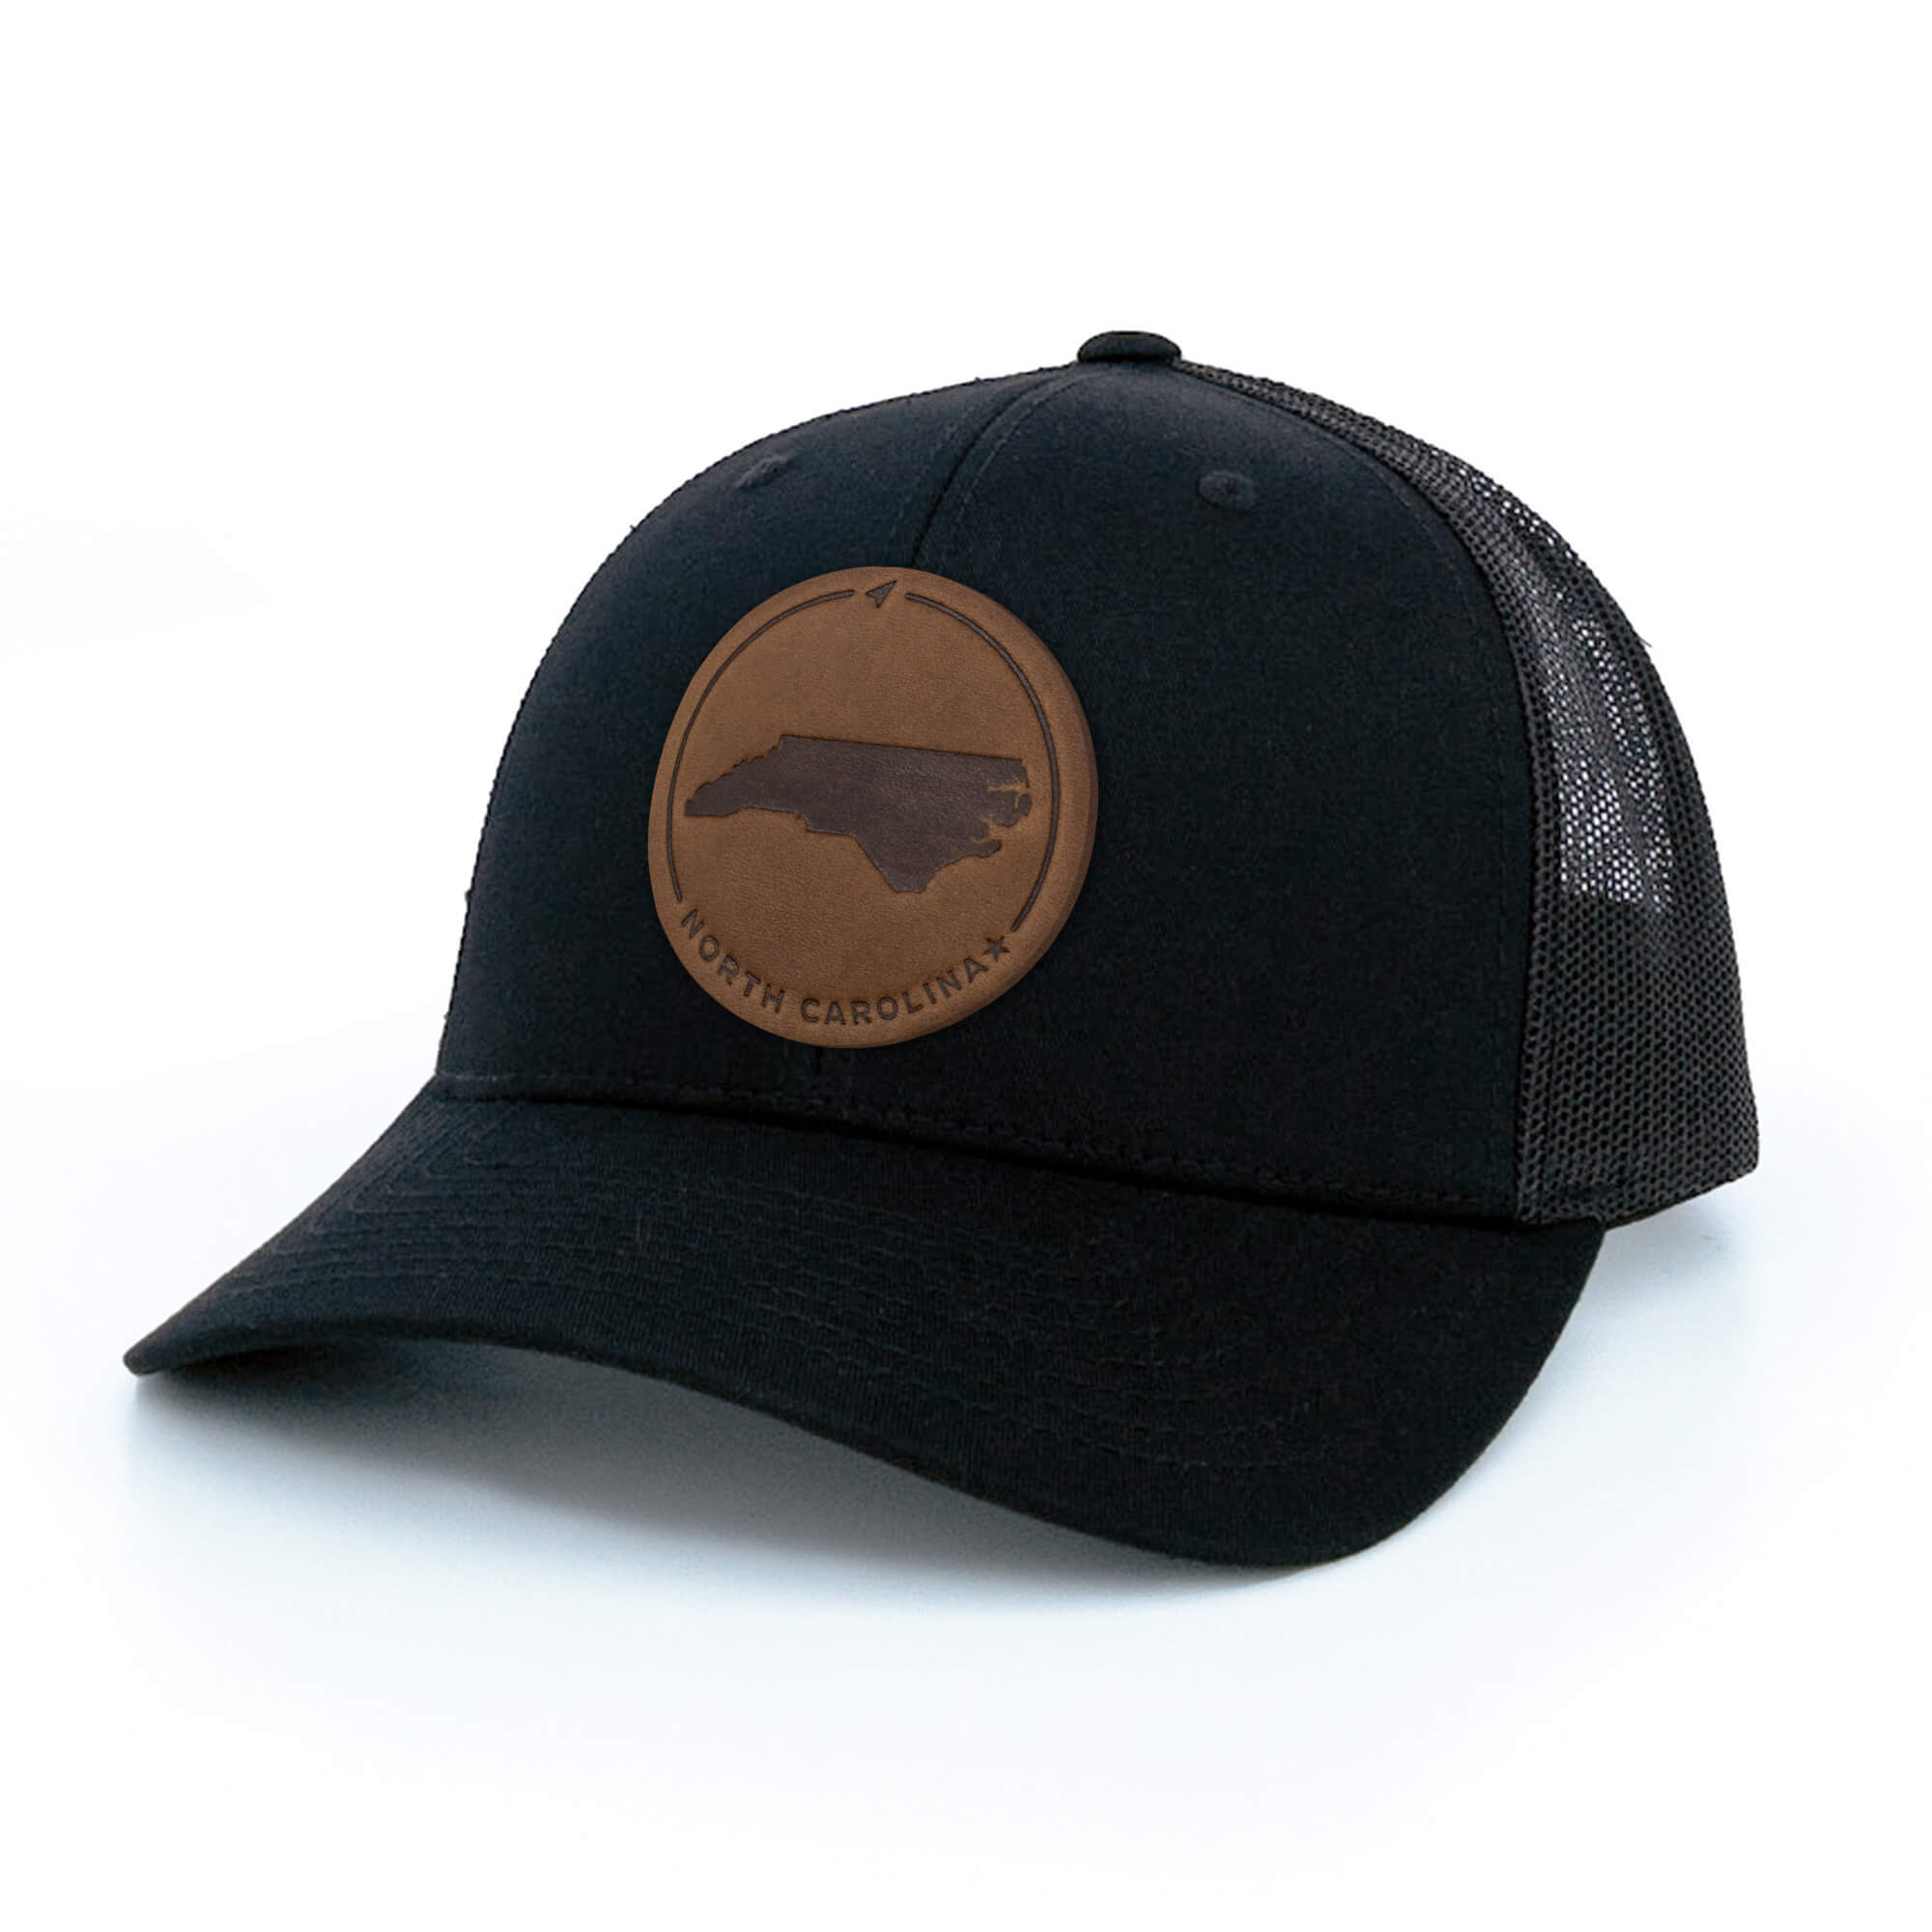 Black trucker hat with full-grain leather patch of North Carolina | BLACK-003-005, CHARC-003-005, NAVY-003-005, HGREY-003-005, MOSS-003-005, BROWN-003-005